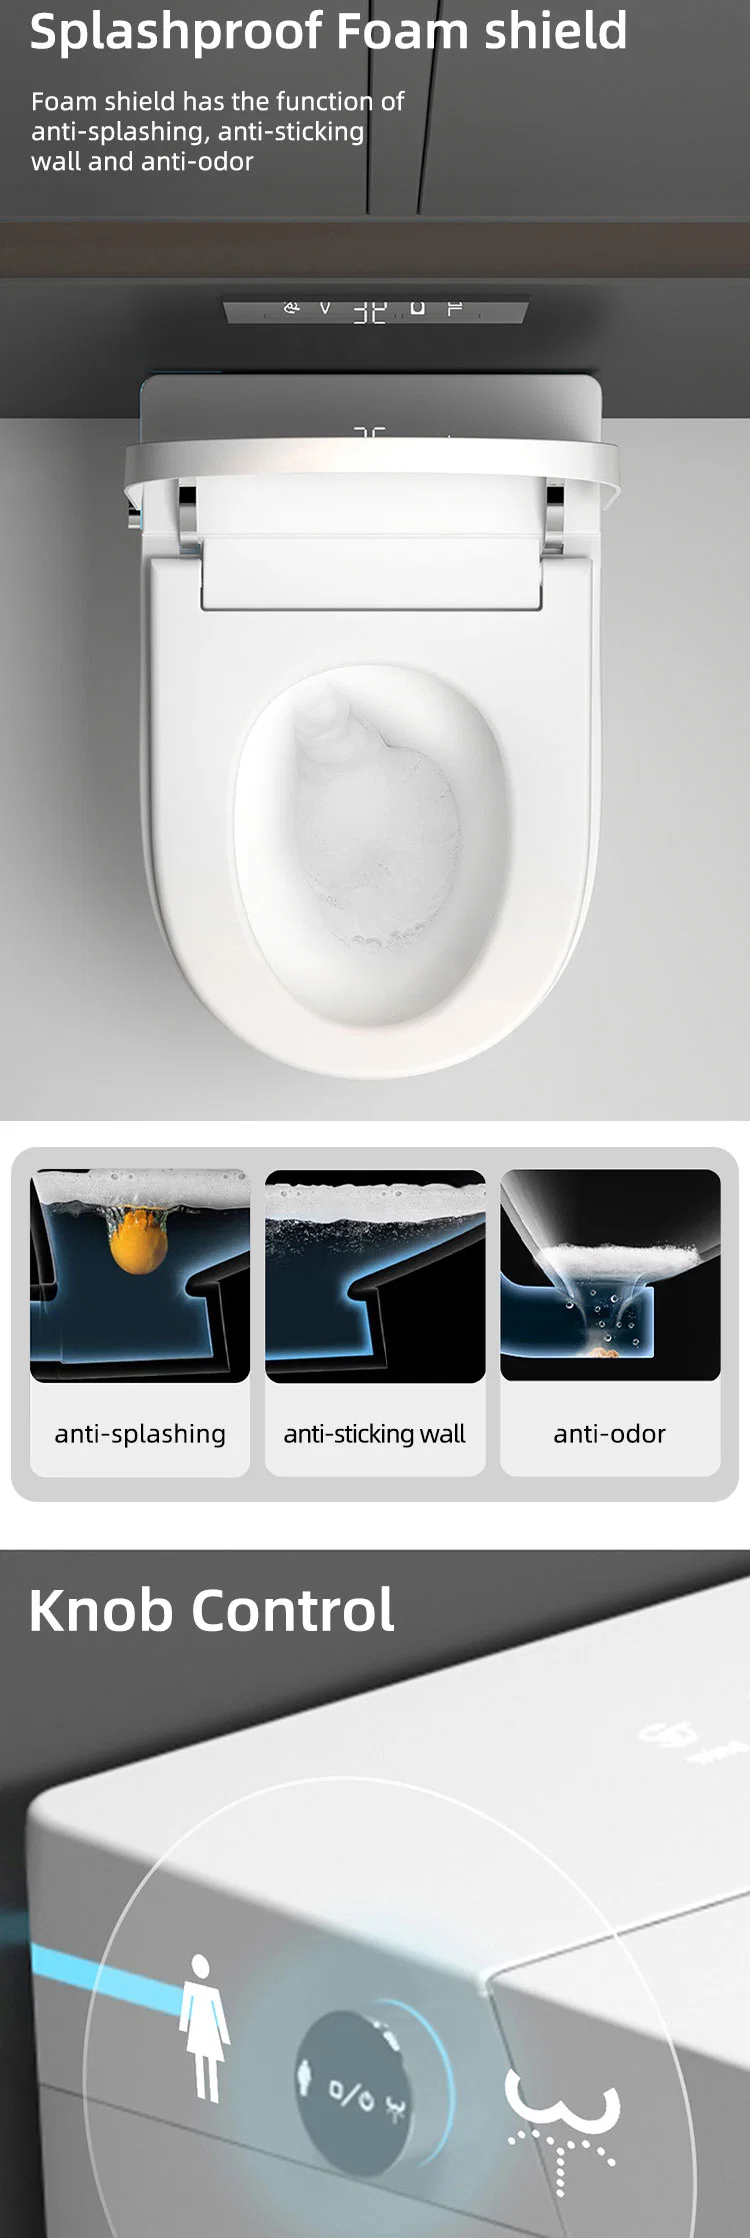 Built-in Cistern Automatic Water Closet Intelligent Wc Bathroom Wall Hung Smart Toilet